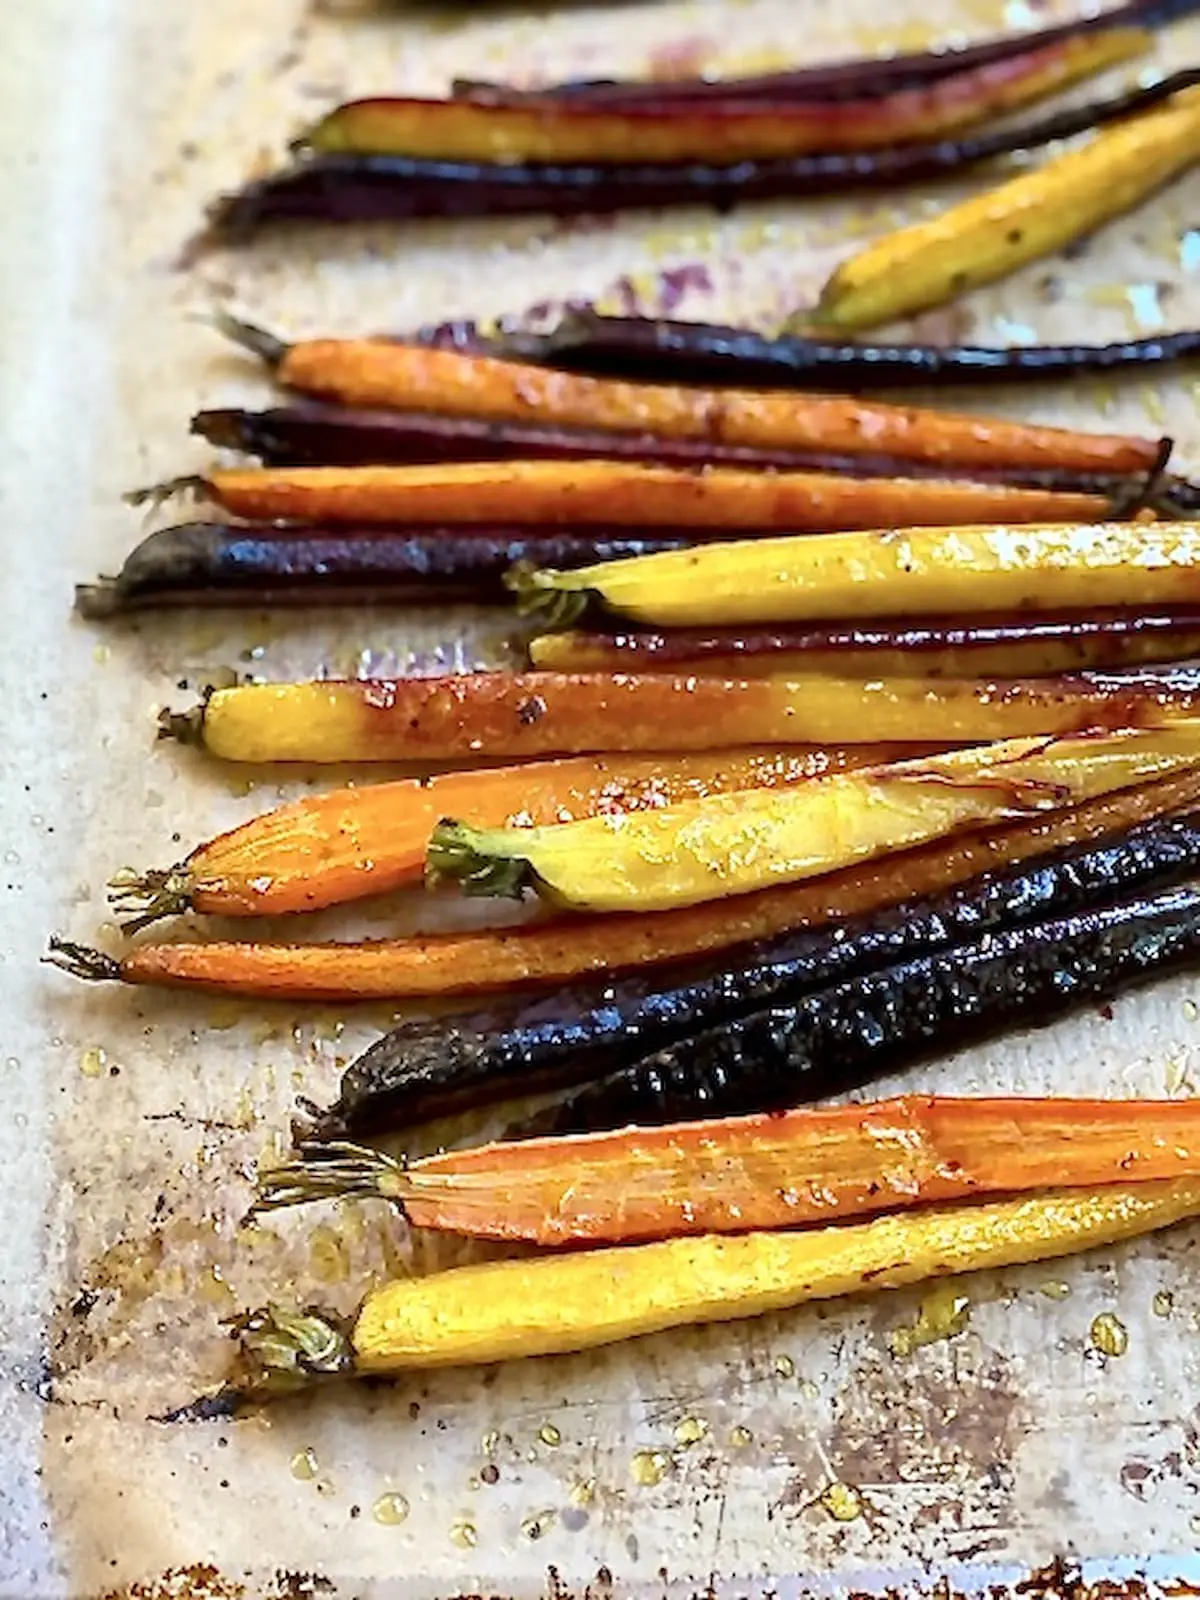 roasted carrots of different colors right out of the oven on a baking sheet.